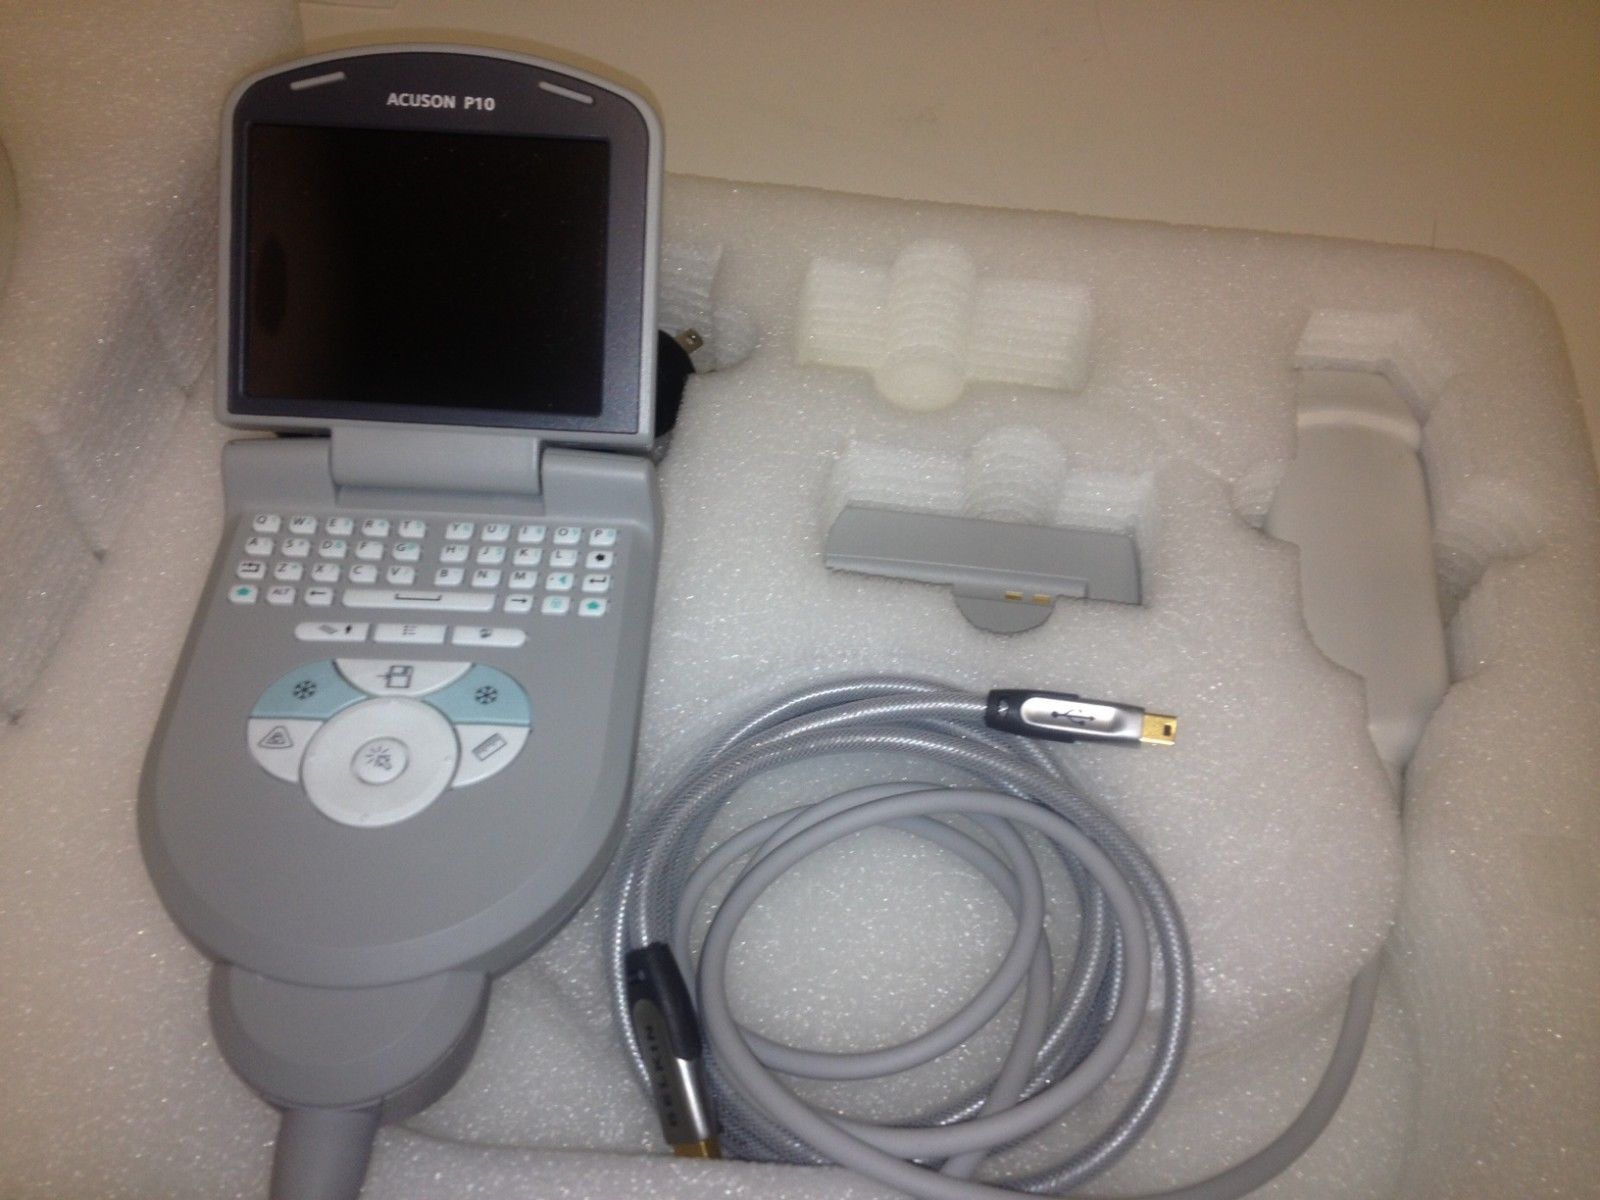 Siemens Acuson P10 Pocket Portable Ultrasound New In Box Opened DIAGNOSTIC ULTRASOUND MACHINES FOR SALE